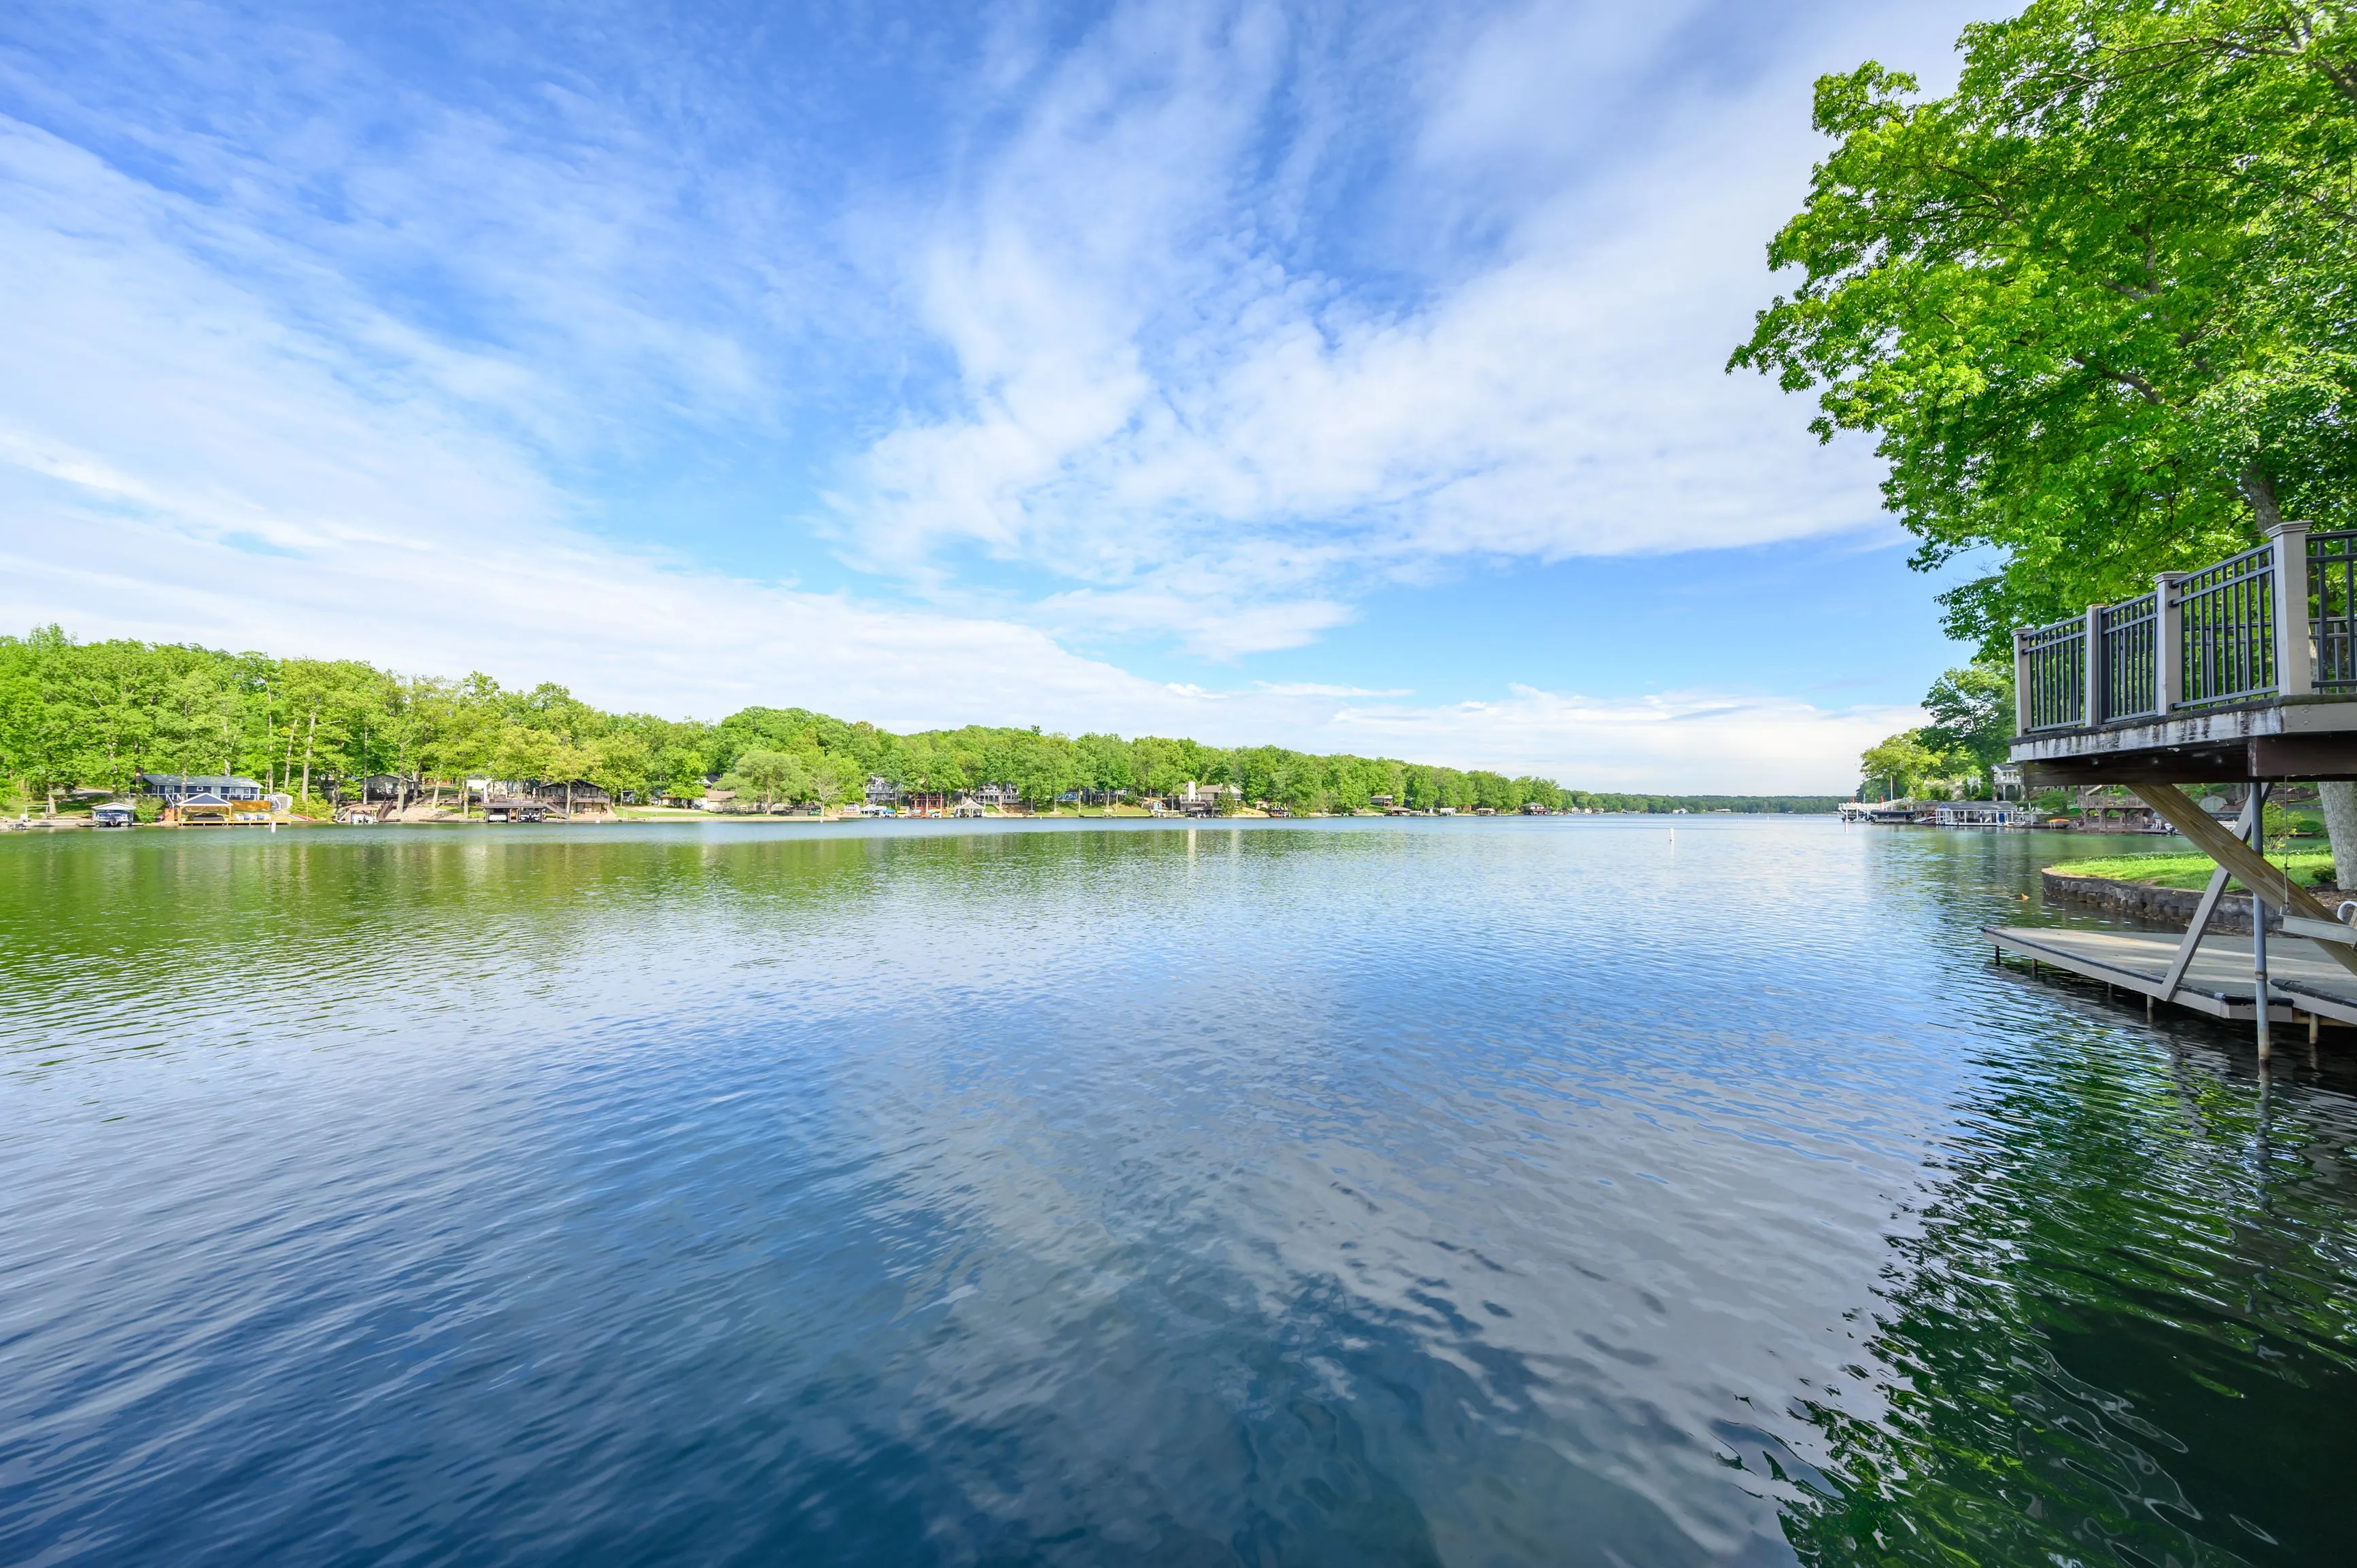 Tranquil lake surrounded by greenery under a vast blue sky with scattered clouds, a pier visible to the right.